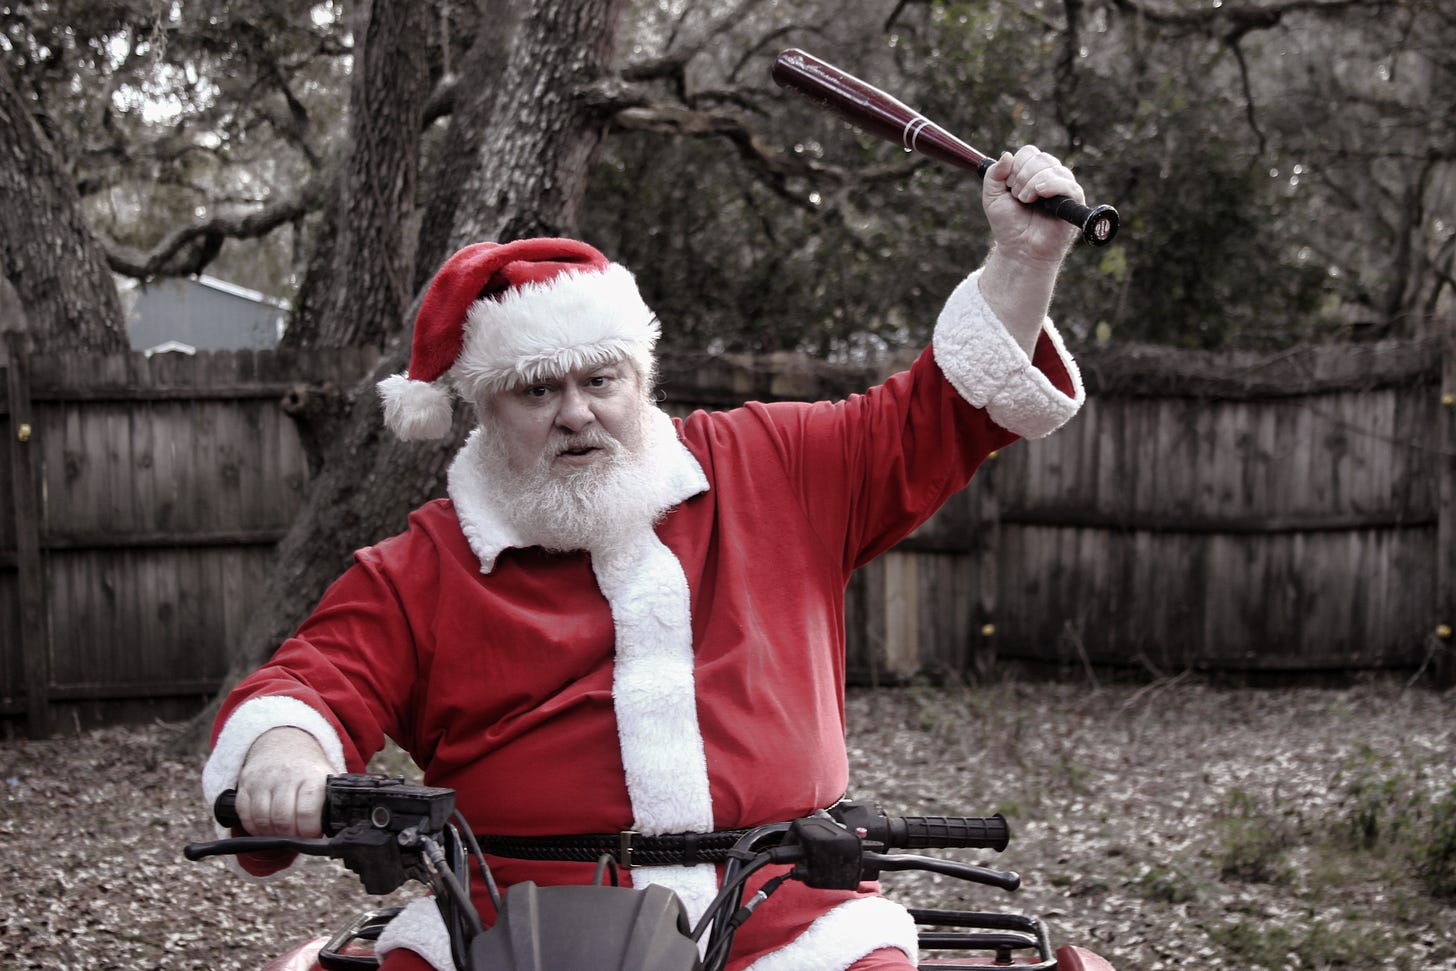 An angry looking santa is on a bicycle and he is raising a bat in his hands at whoever is taking the picture. In the background are bare trees and dead leaves and a garden fence.